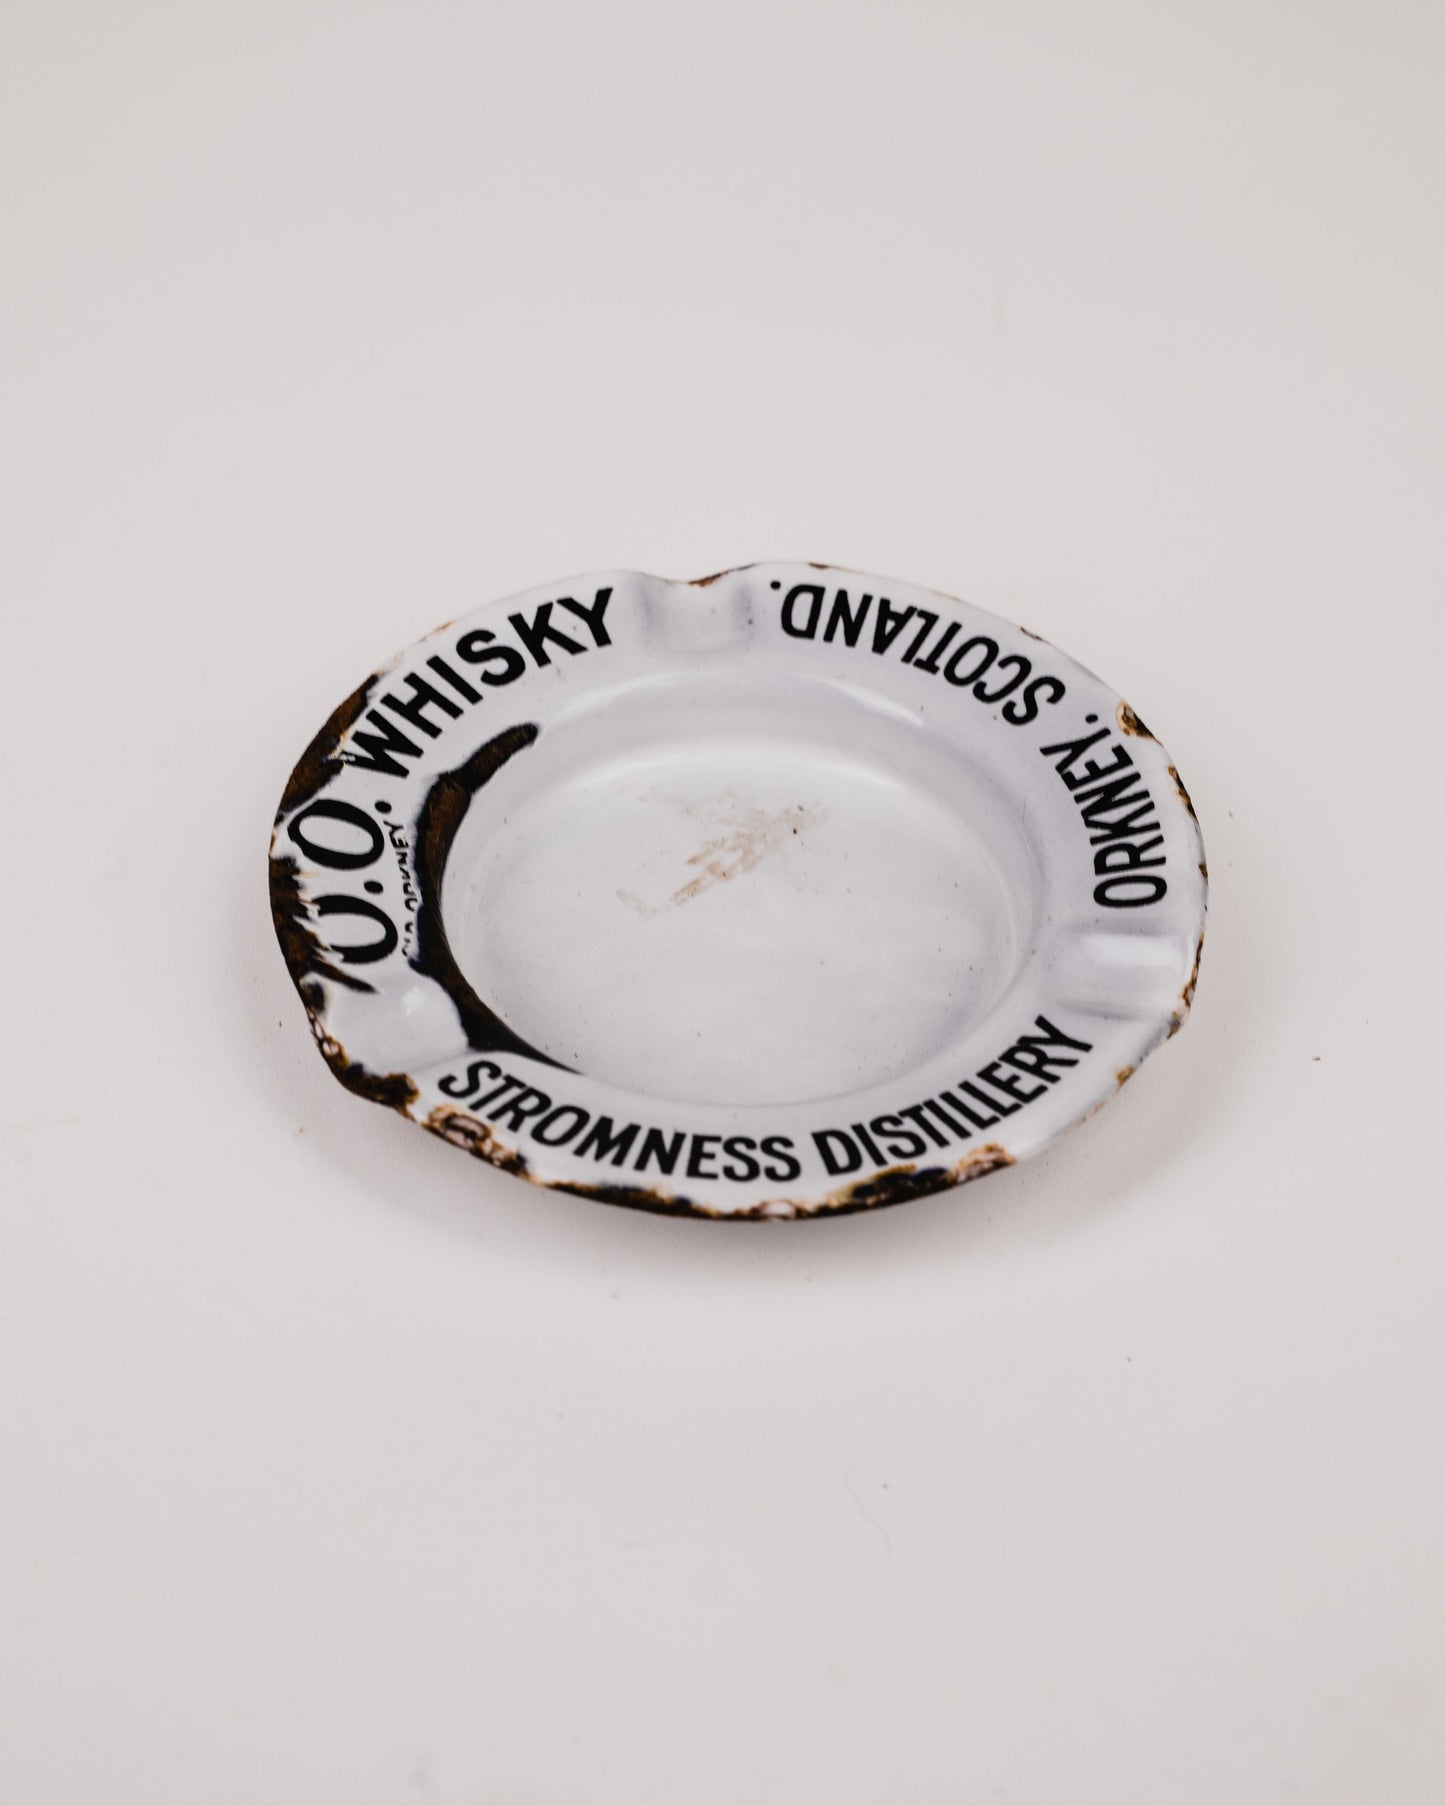 Early 1900s O.O. (Old Orkney) Whisky Enamelled Ashtray